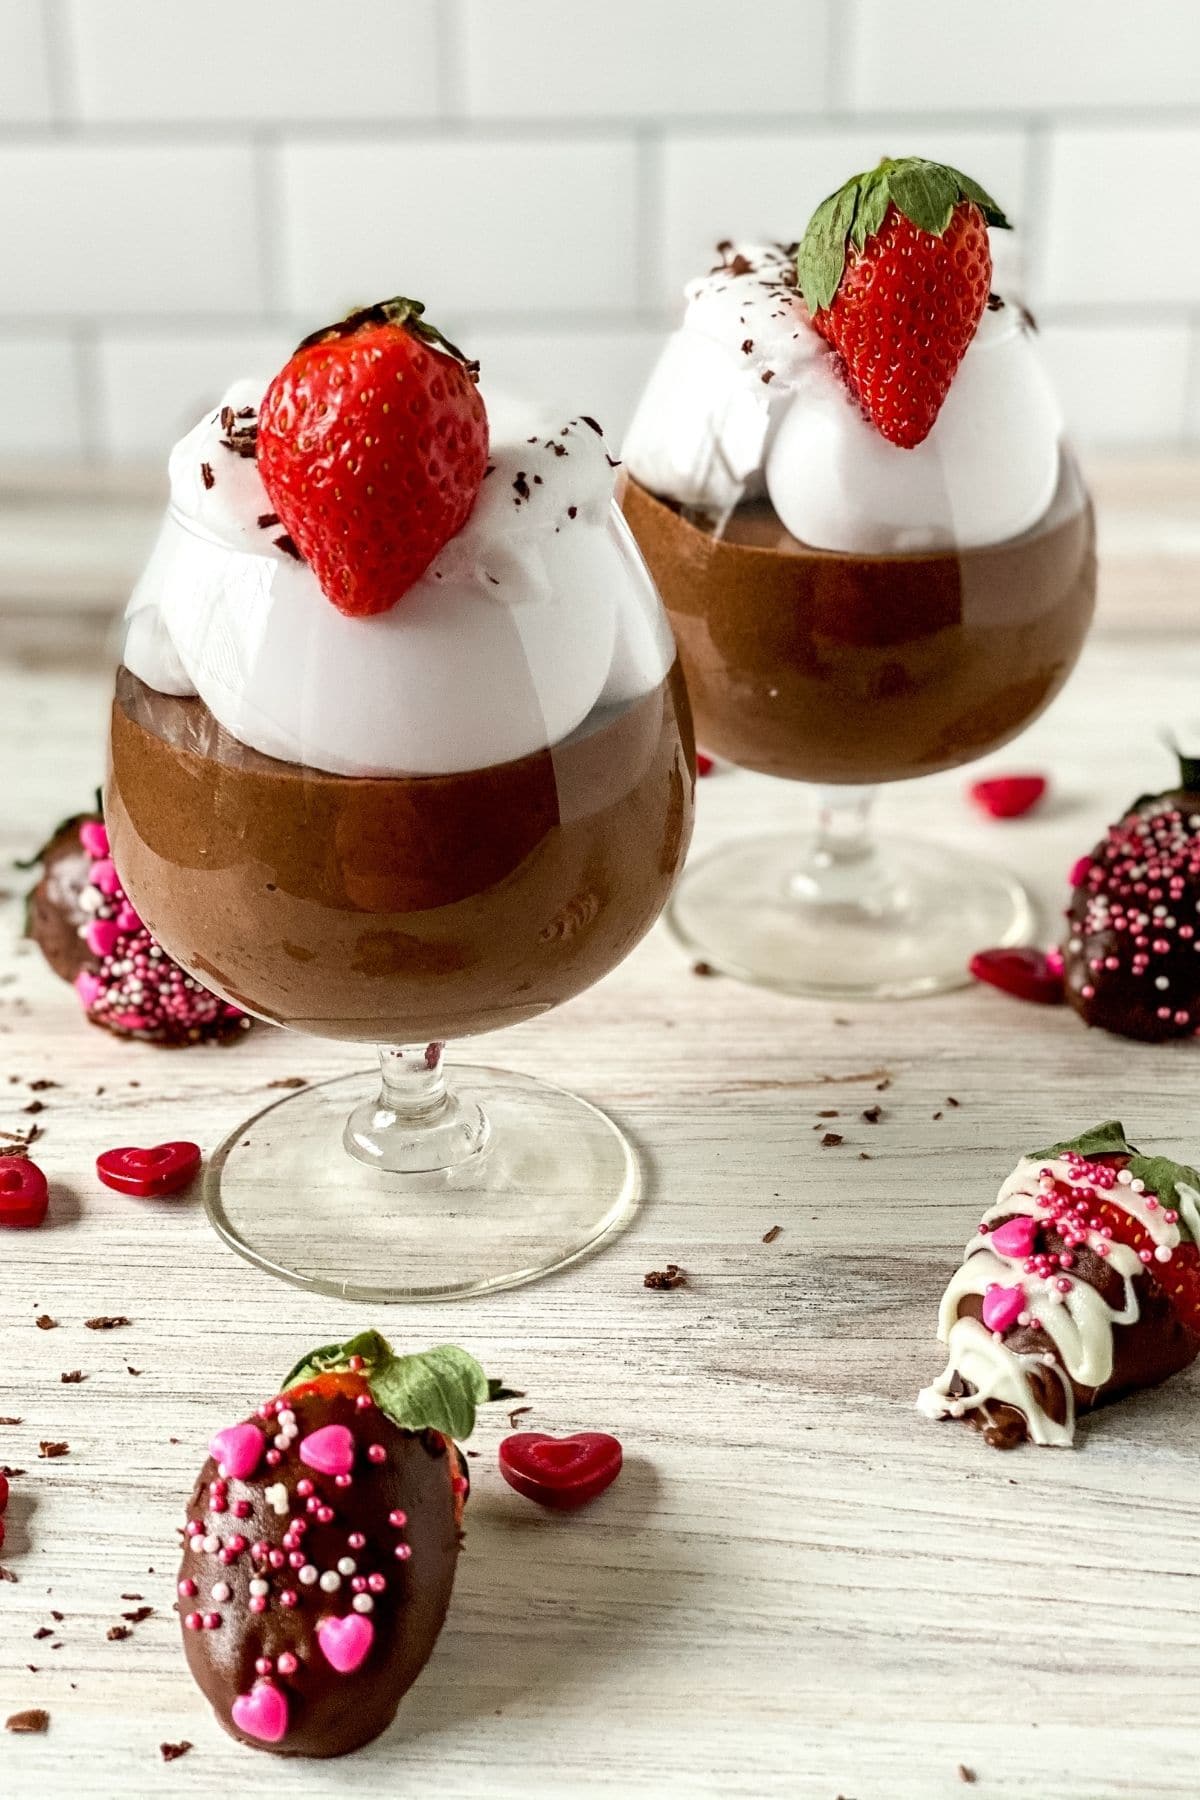 Glass dessert cup of chocolate mousse